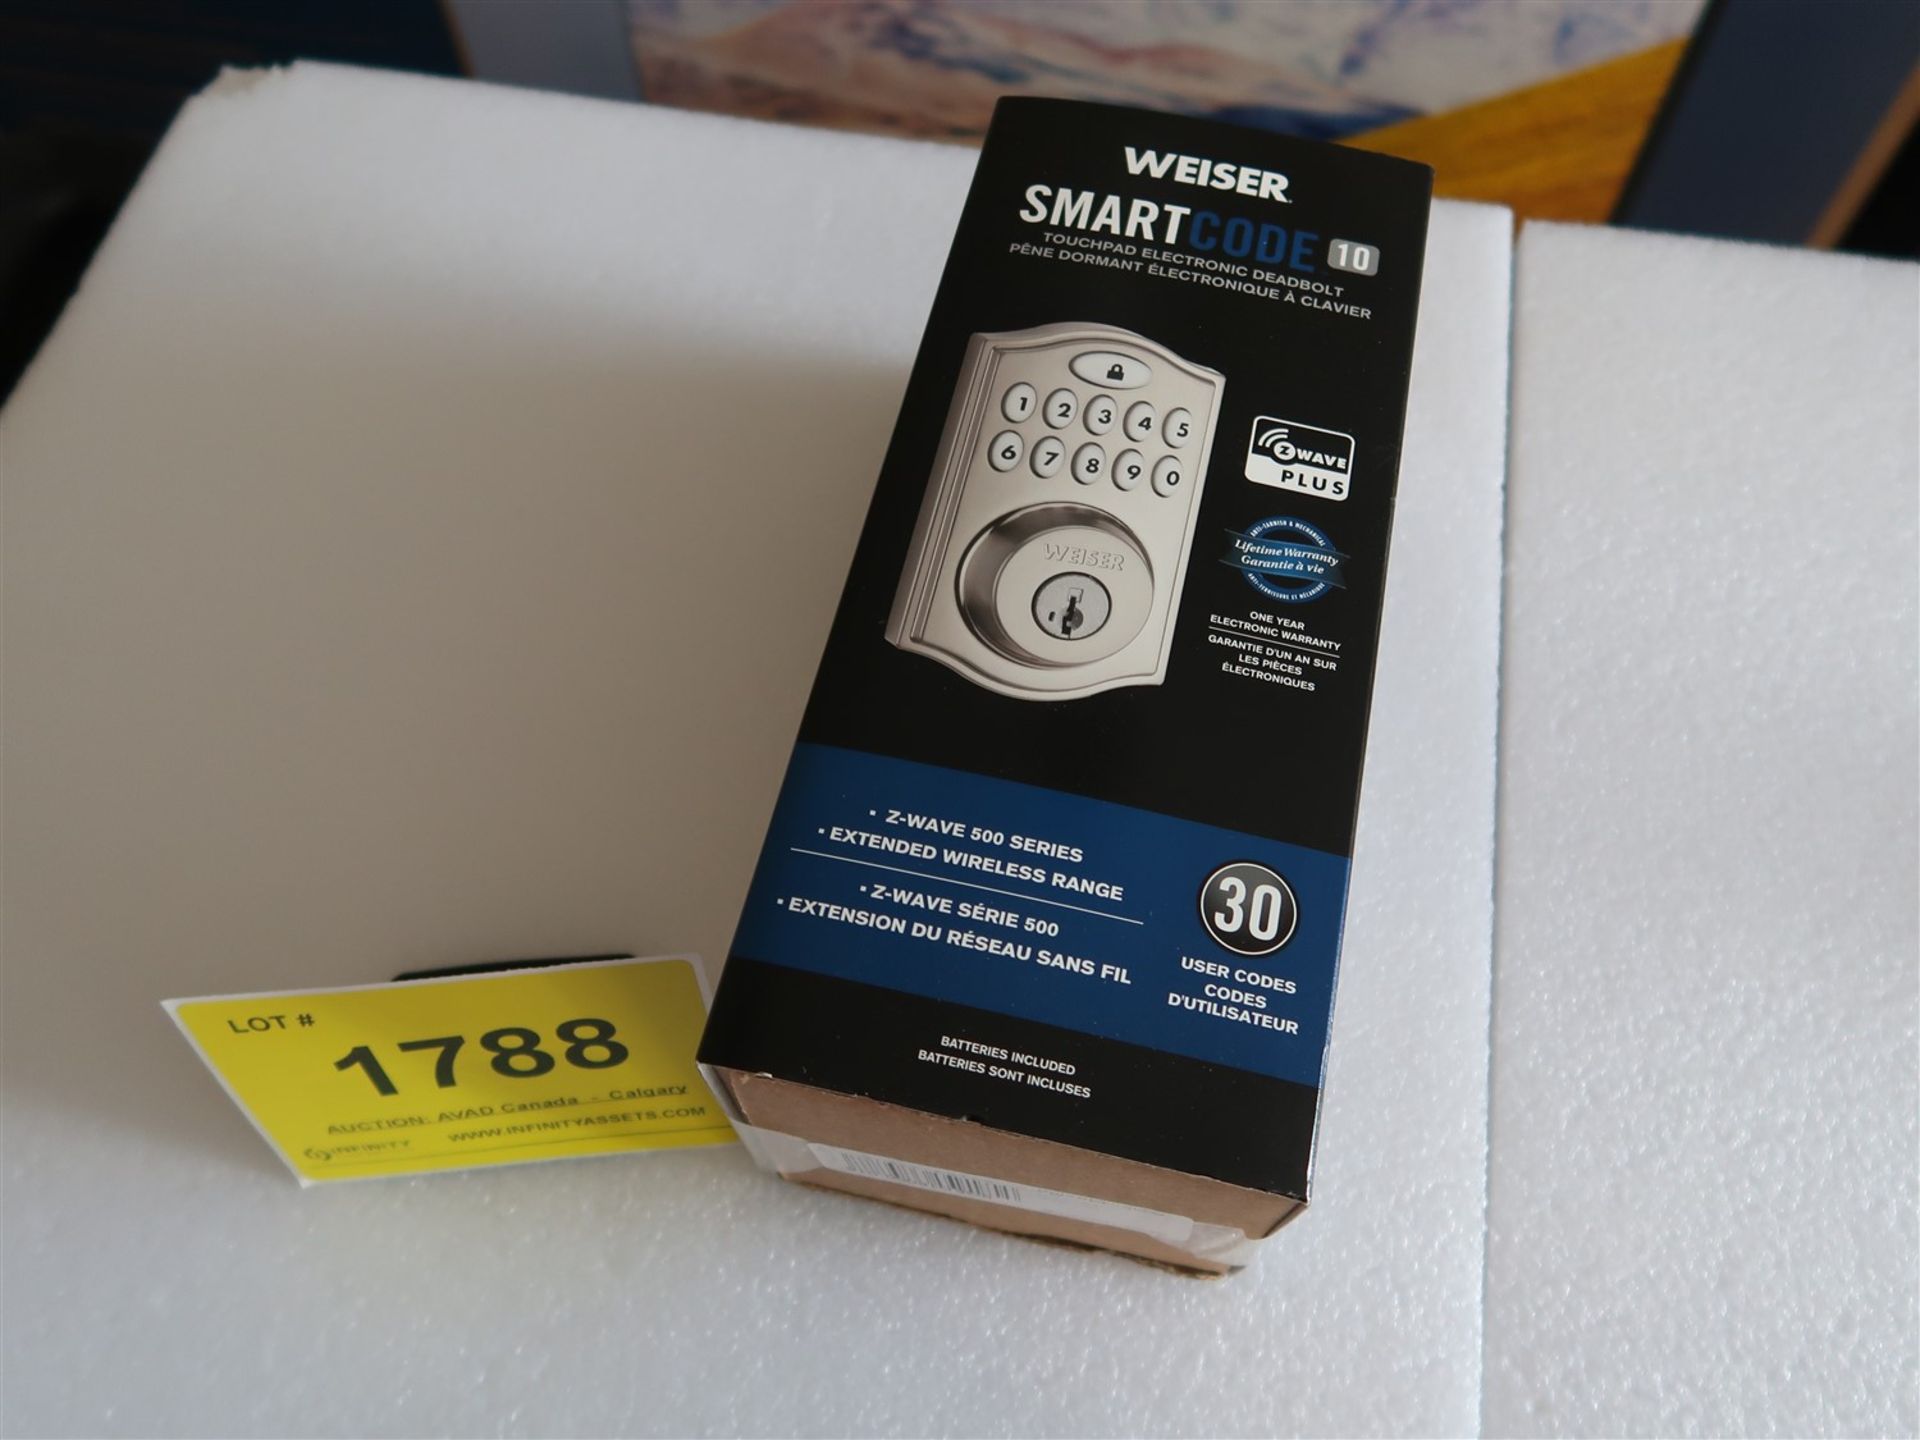 WEISER SMART CODE 10 TOUCH PAD ELECTRONIC DEAD BOLT SILVER FINISH 9GED 18000-016, (BNIB)